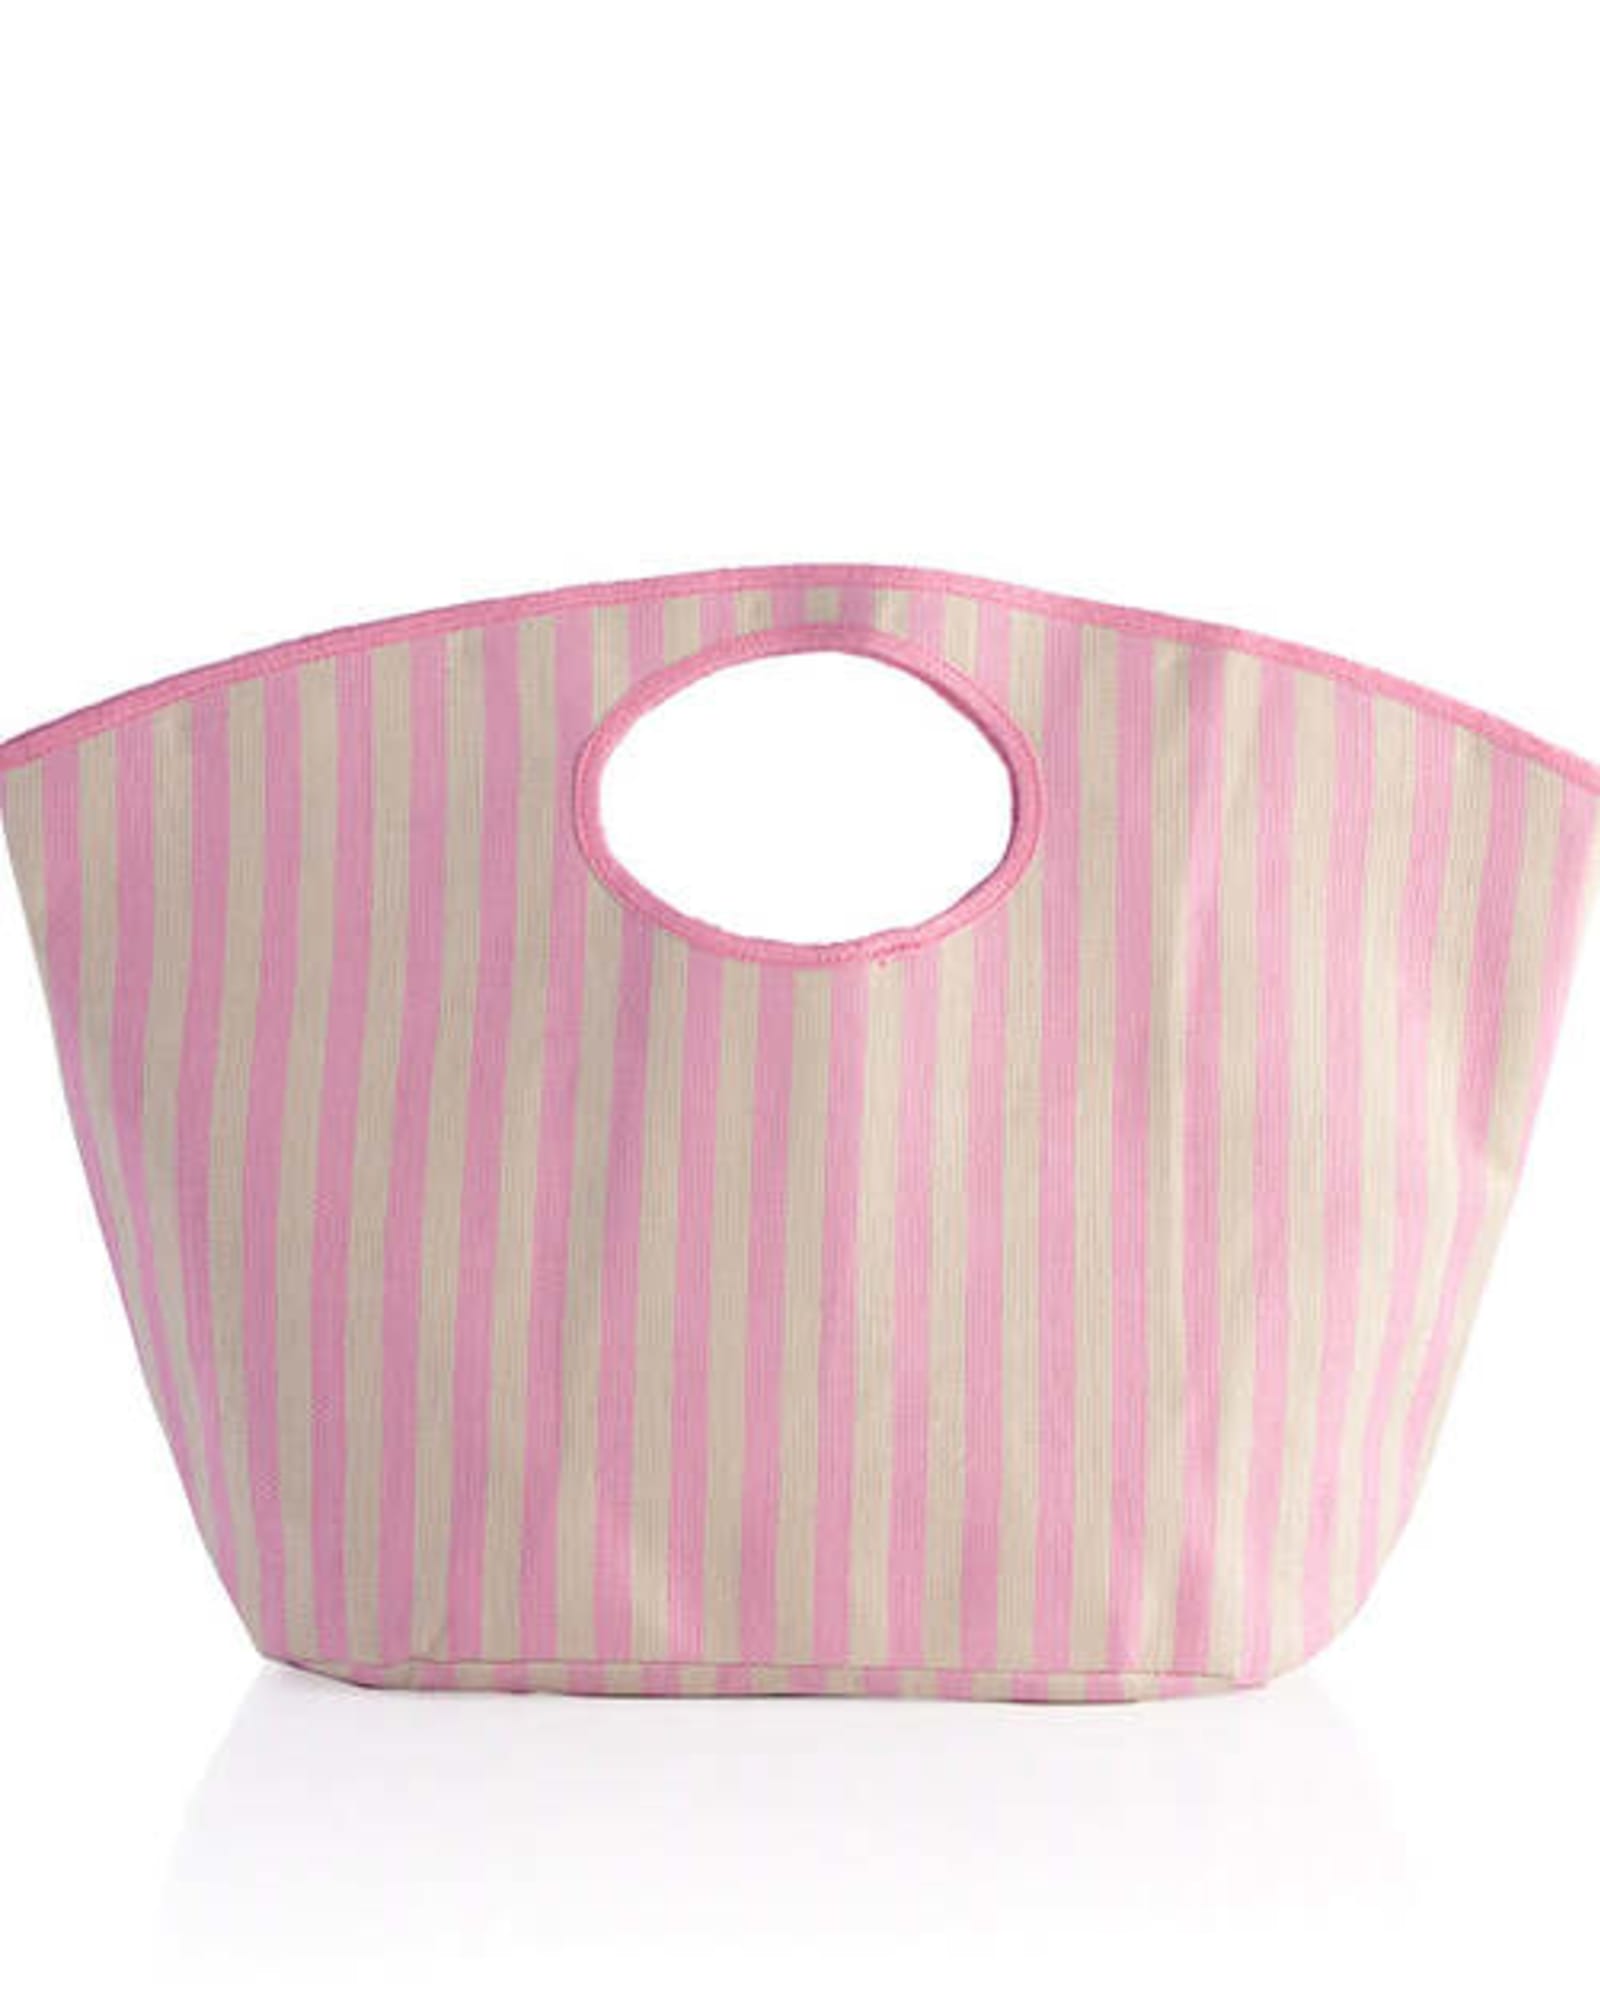 Lolita Tote | Pink and Ivory